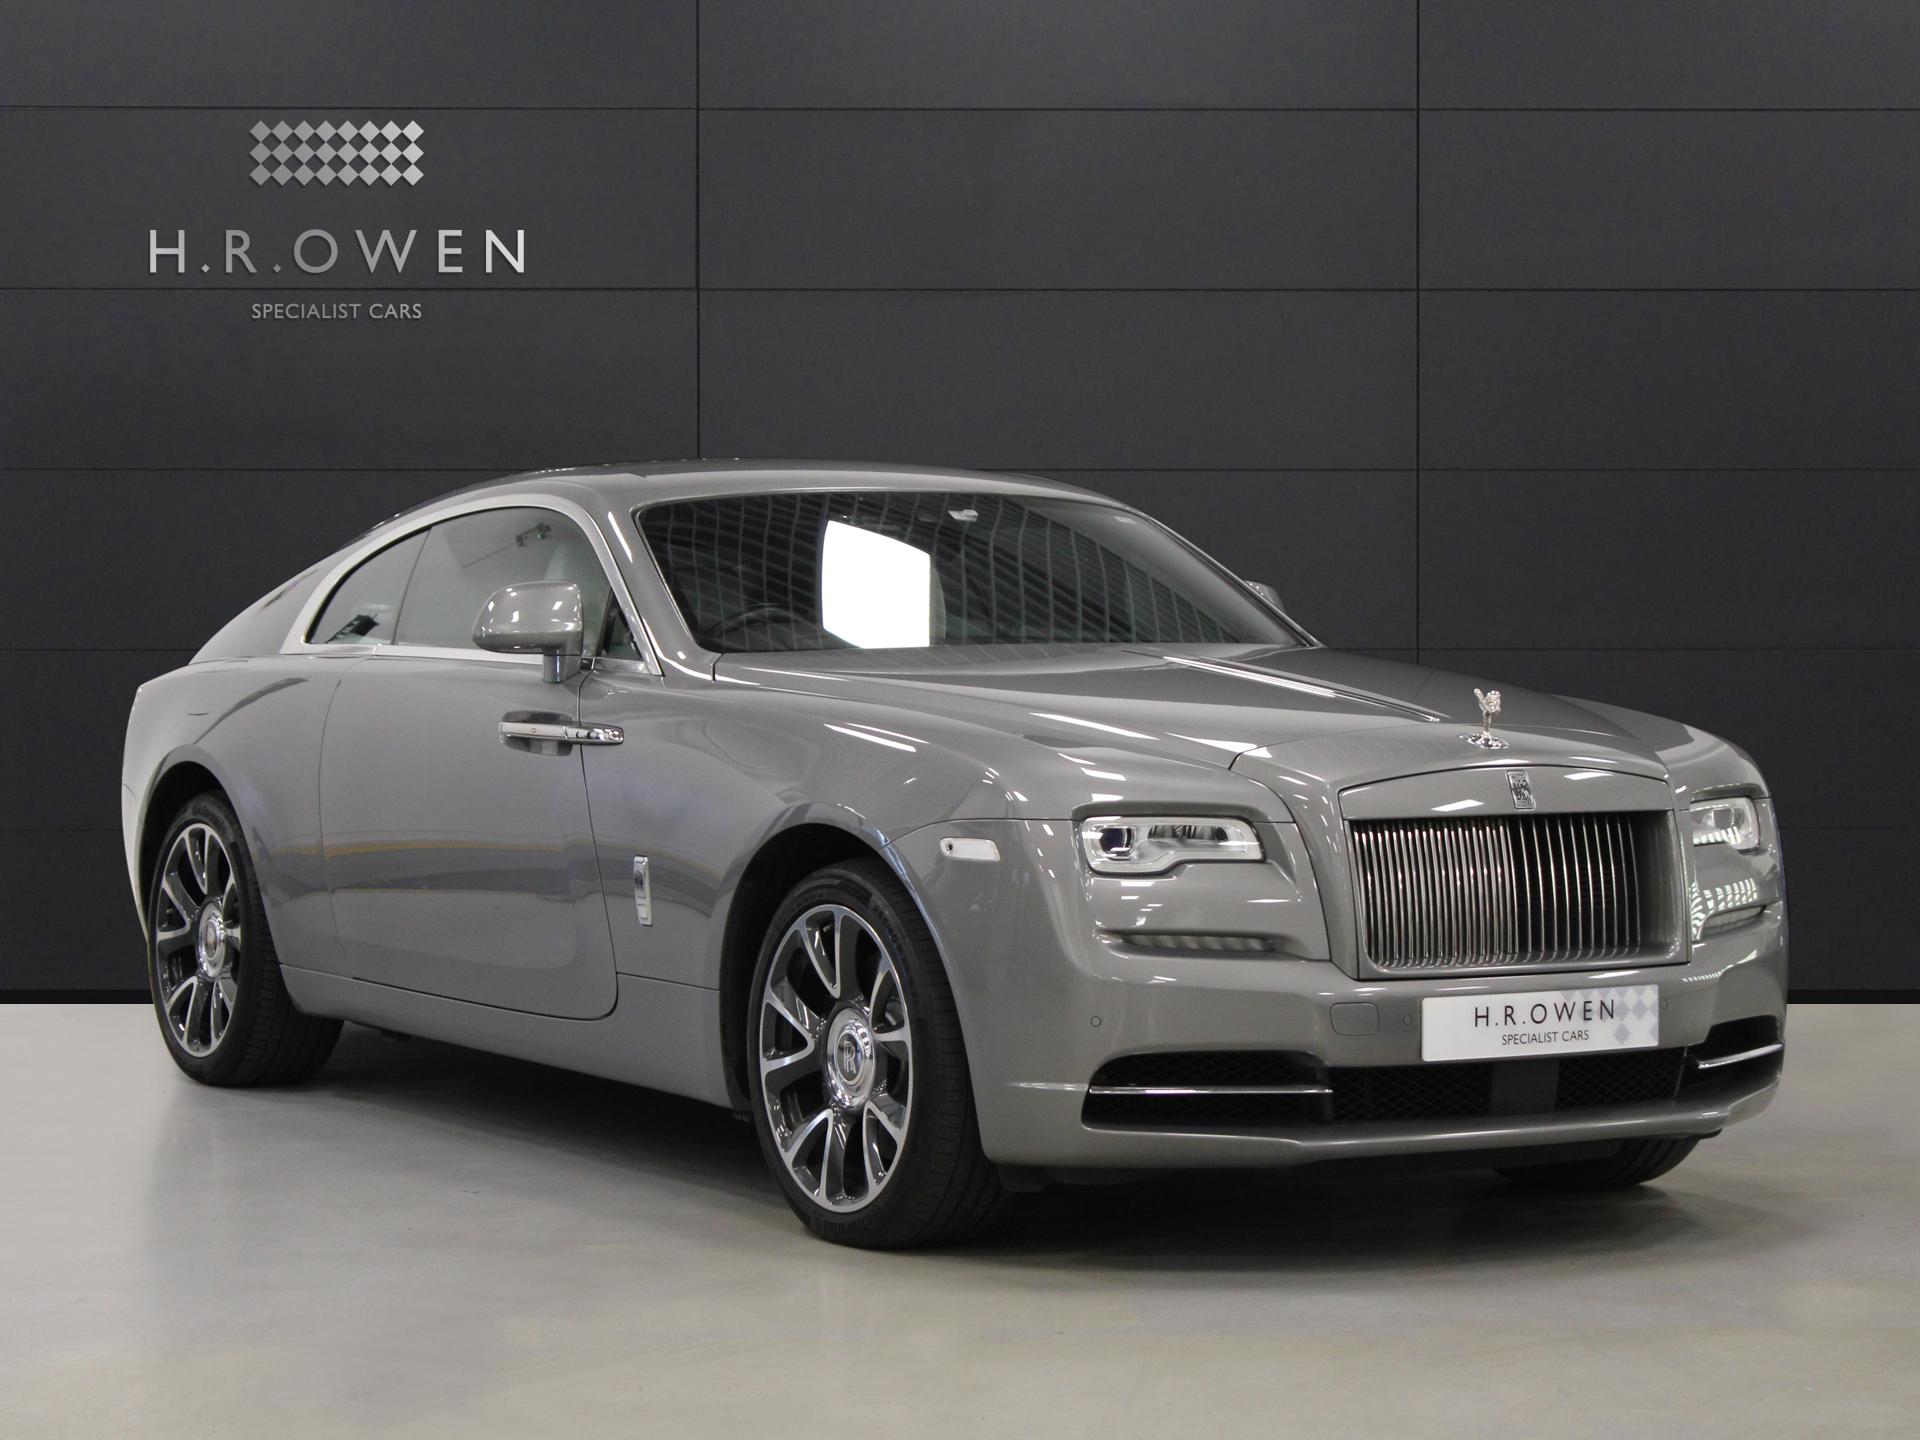 HR Owen joins forces with Armand de Brignac to sell two RollsRoyces  filled with champagne  Car Dealer Magazine